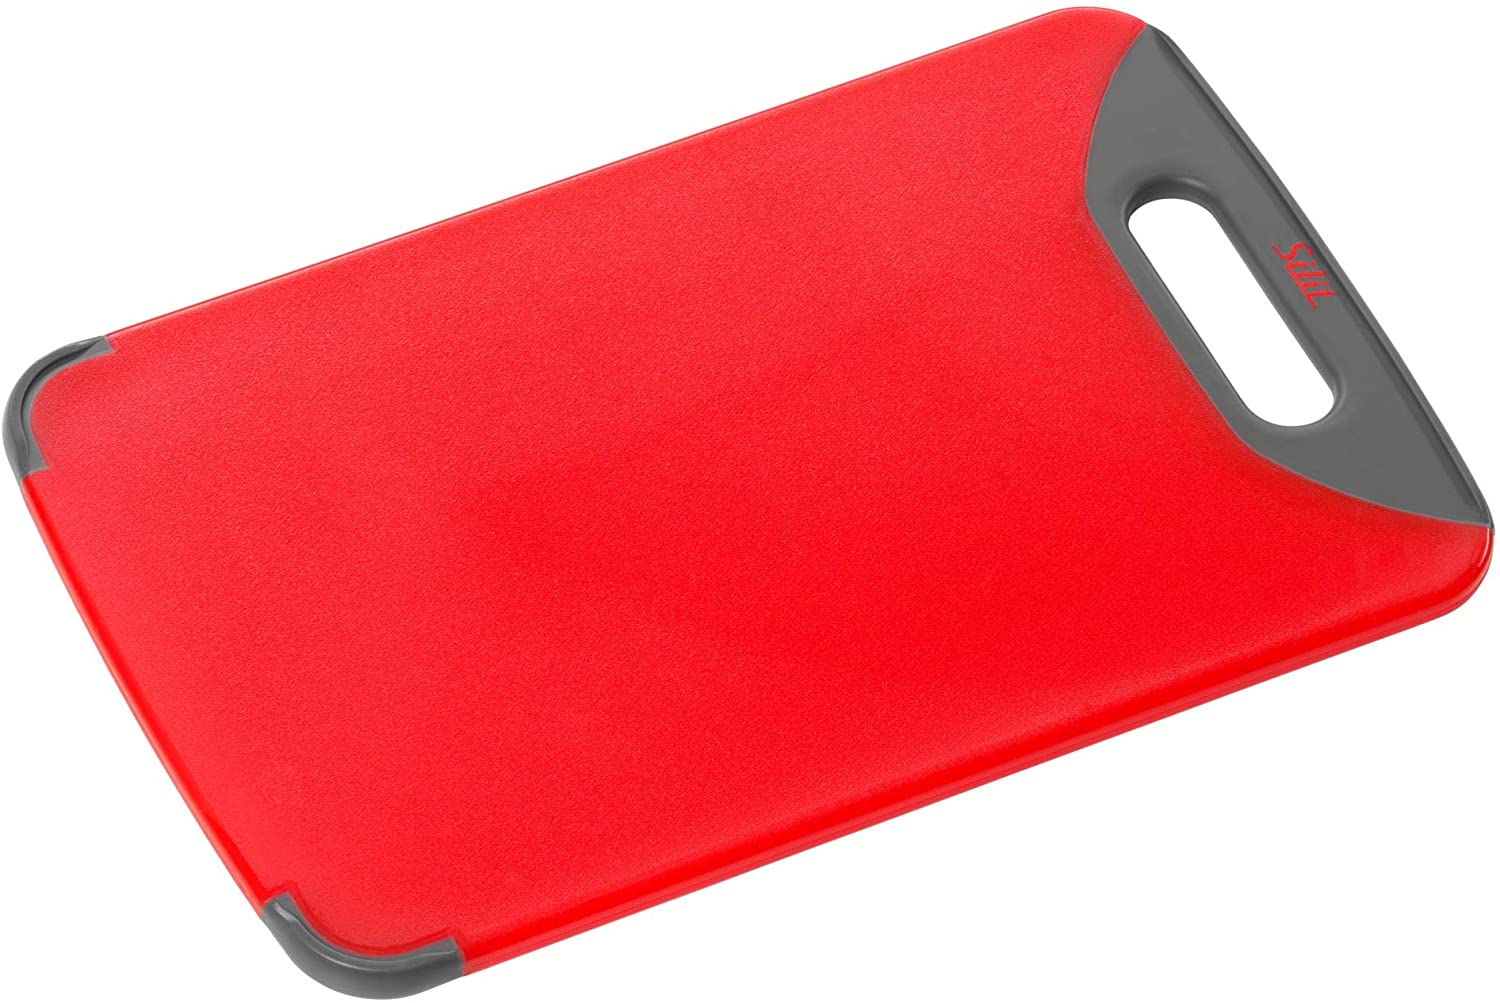 Silit 0020.7680.01 Chopping Board Anti-Bacterial Red 32 x 20 cm